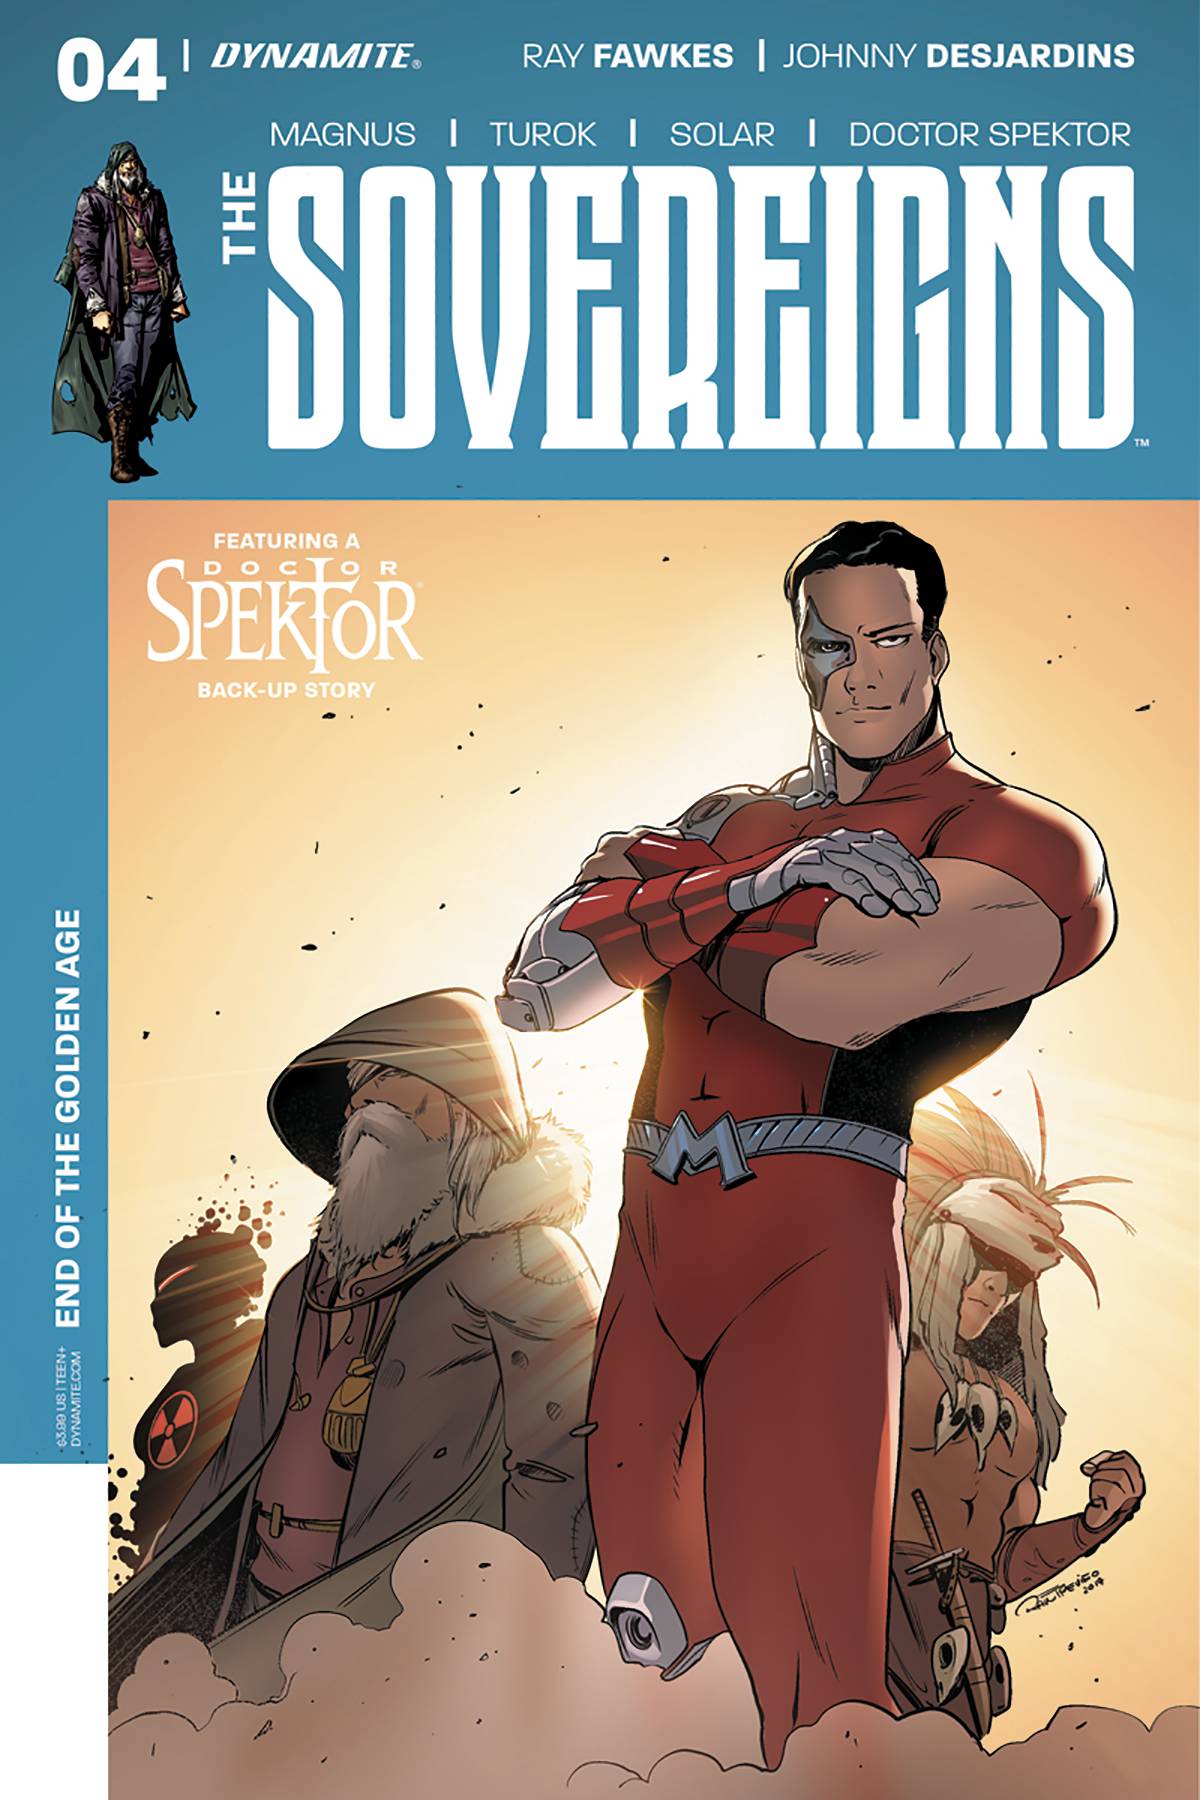 SOVEREIGNS#4